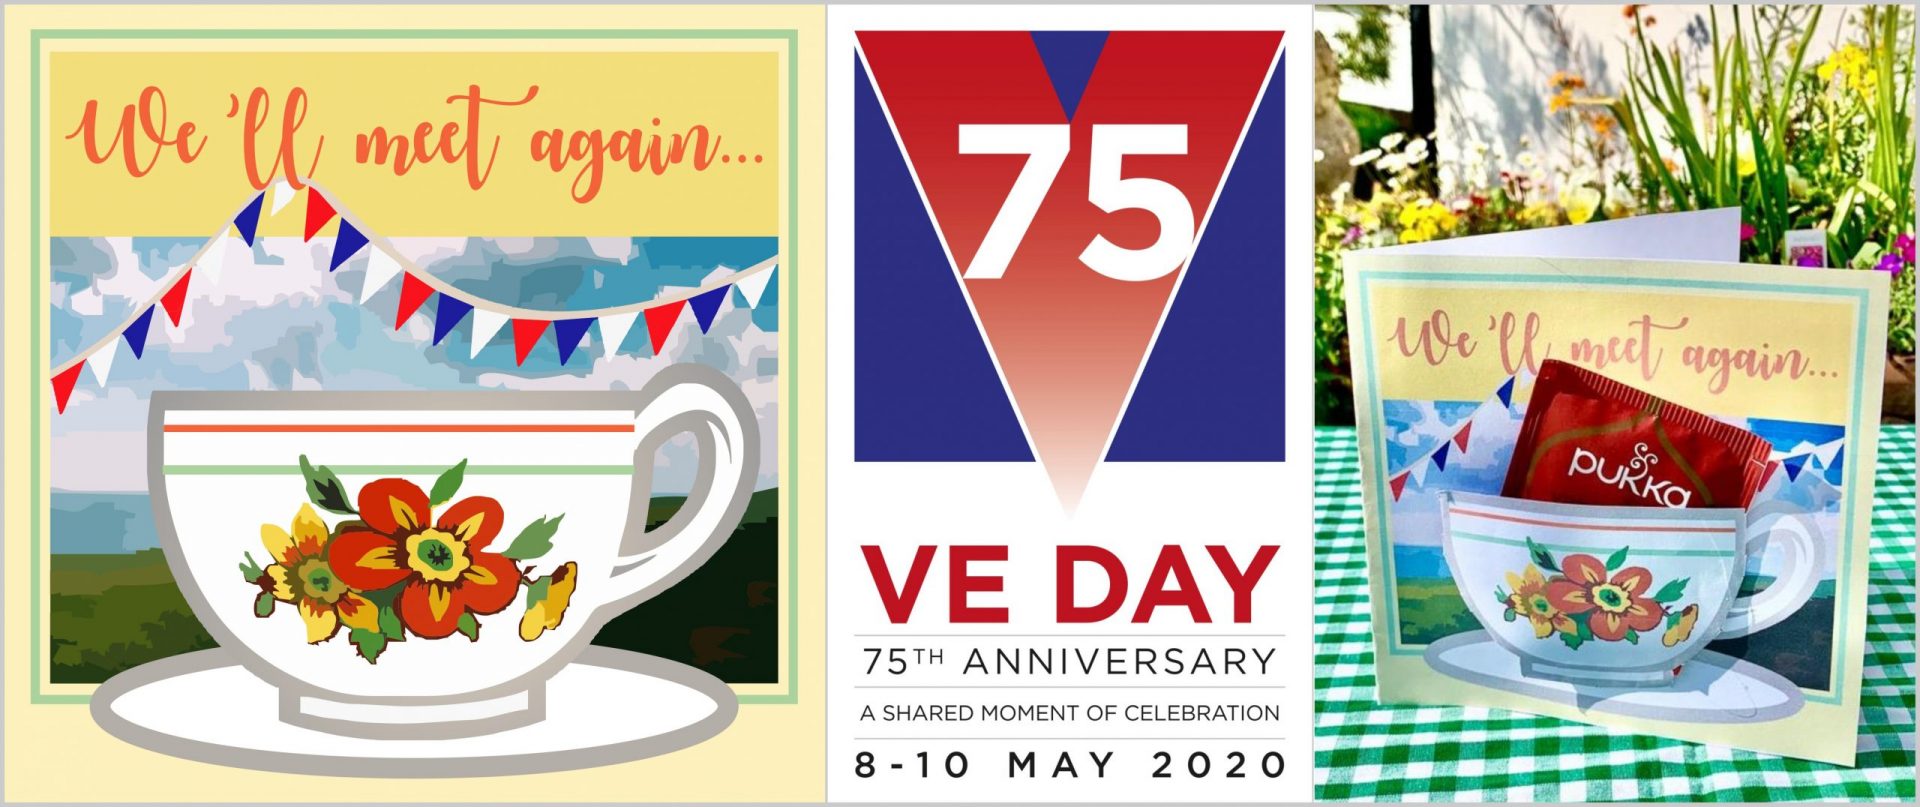 graphic illustration showing rural coffee caravan we'll meet again teacup card design of 1940s style teacup against background of clouded sky and fields alongside VEDAY 75th anniversary logo